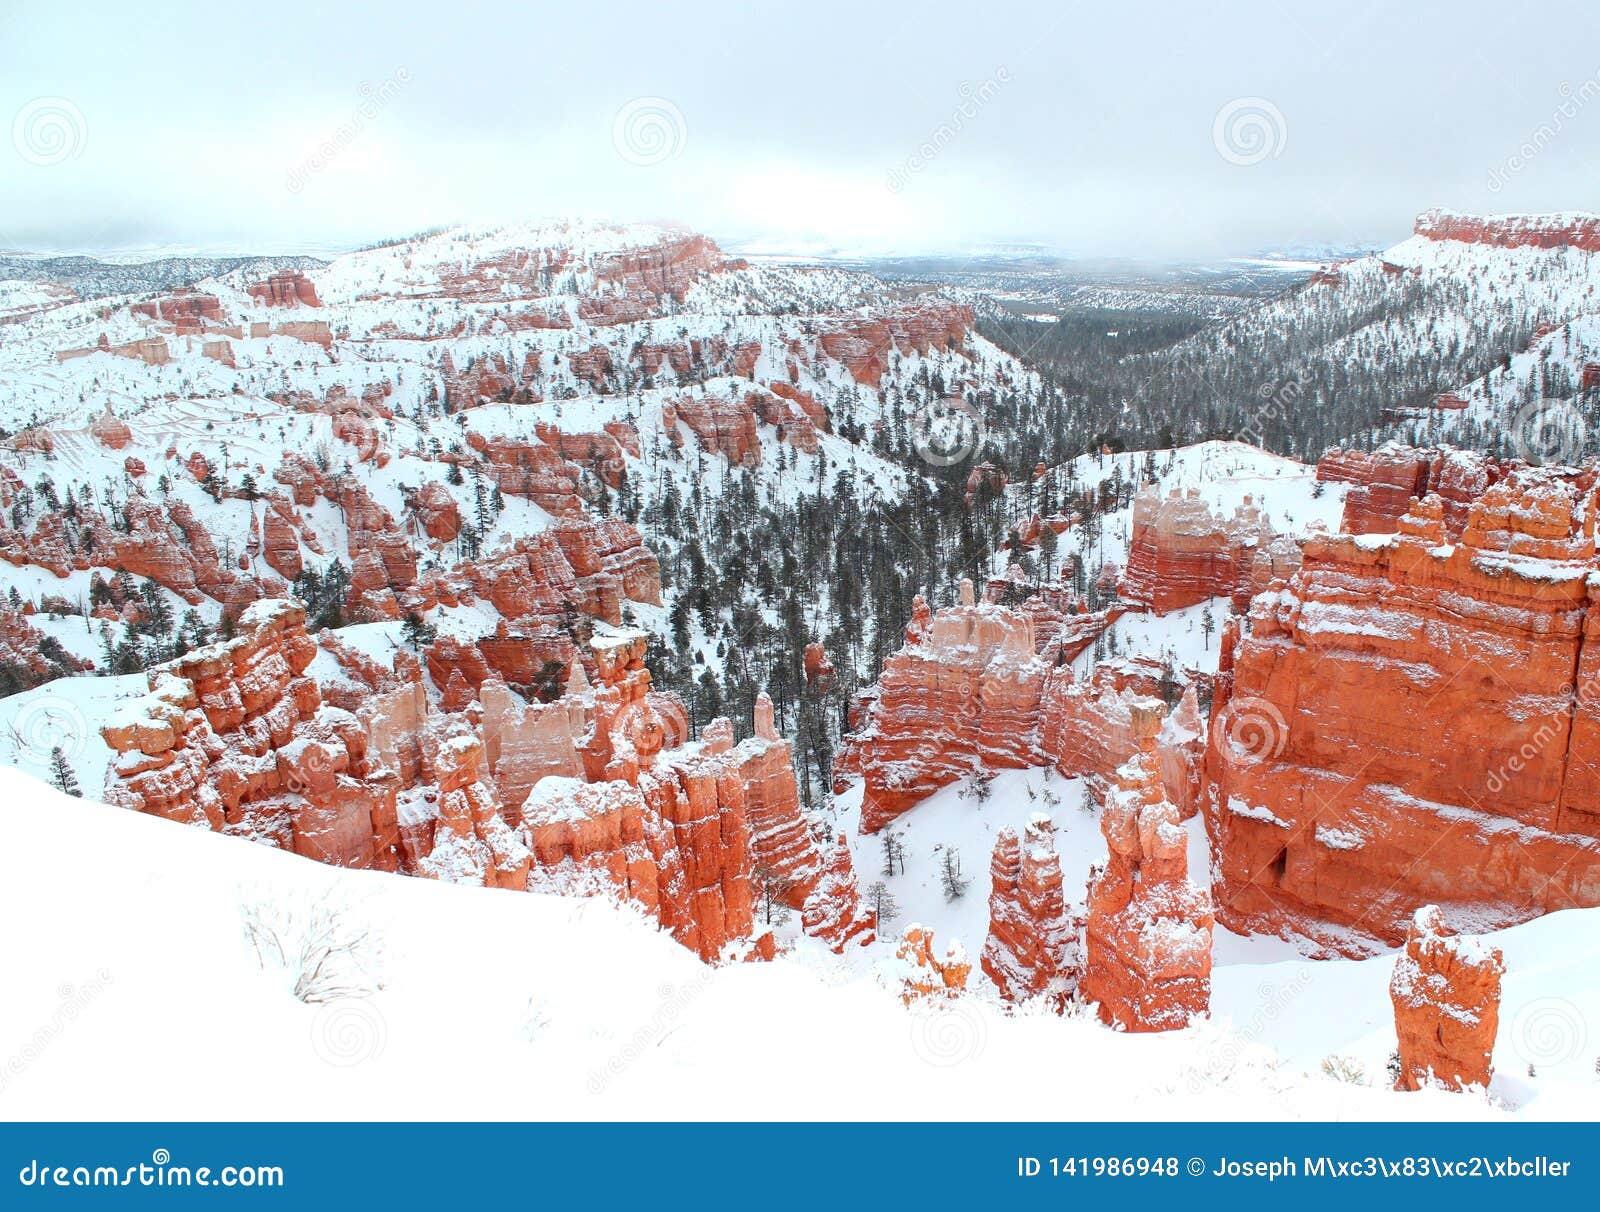 beautiful panoramic view of bryce canyon nationalpark with snow in winter with red rocks / utah / usa